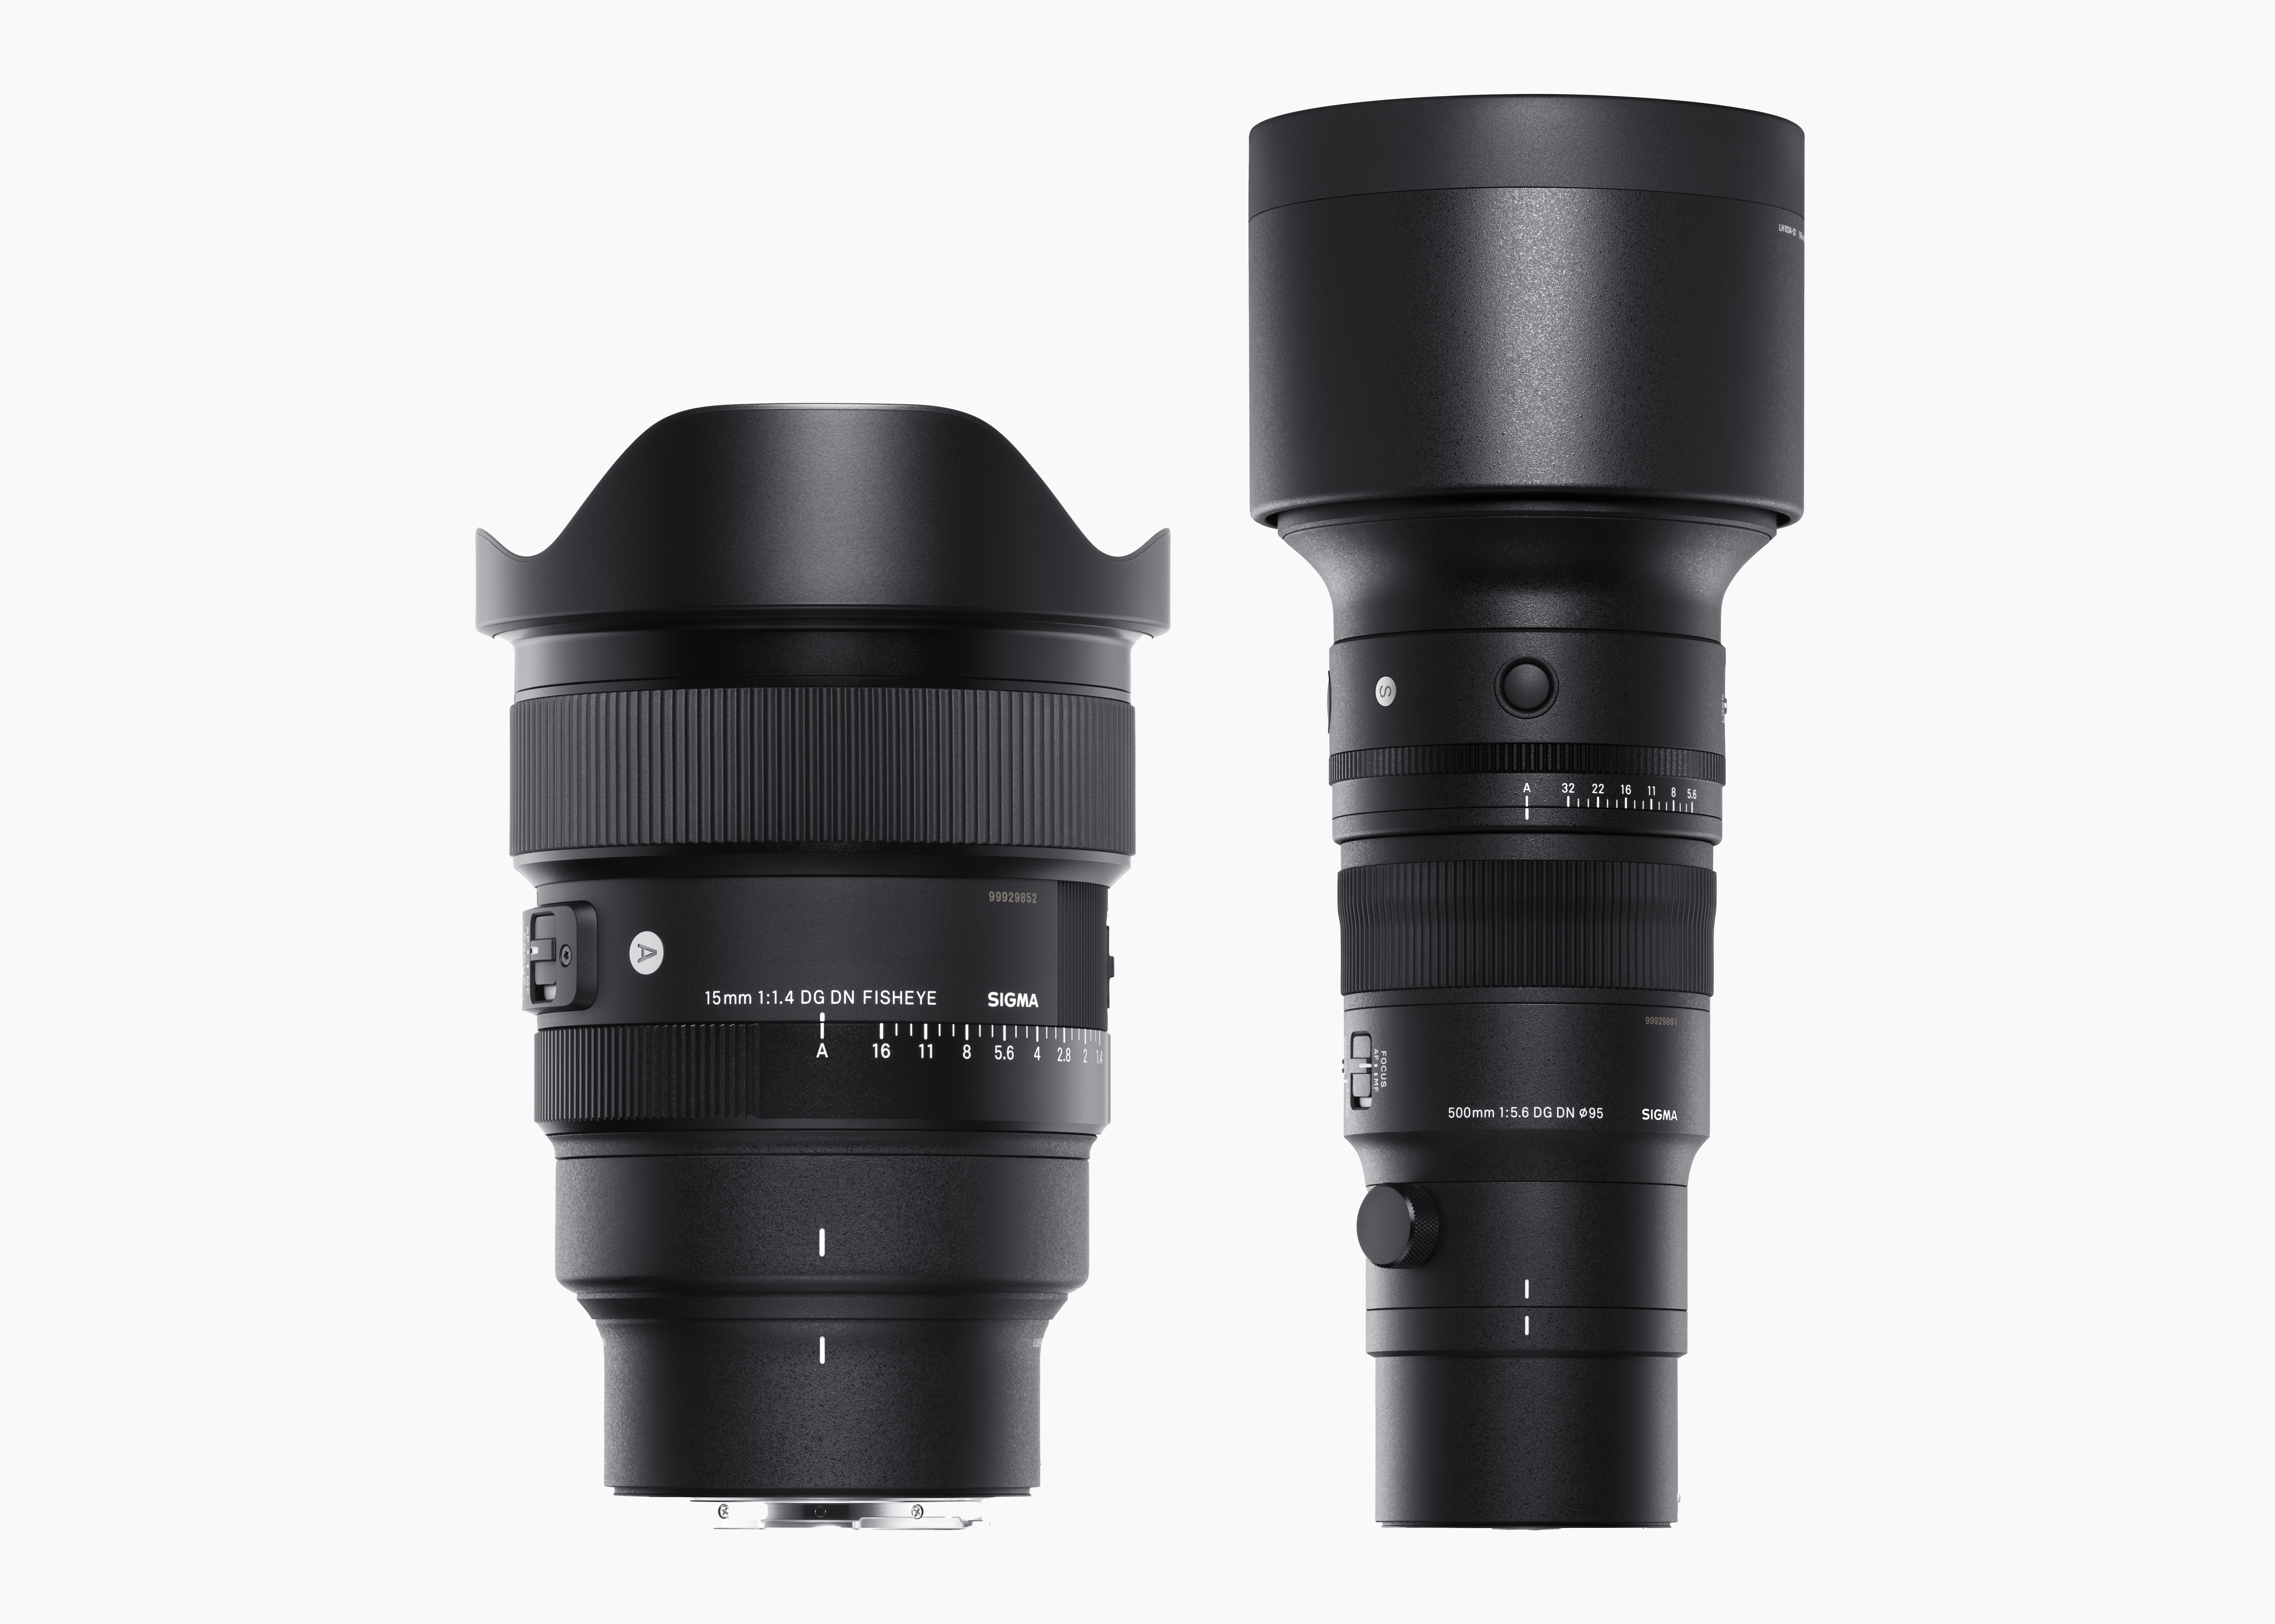 NEW SIGMA 15mm F1.4 DG DN and SIGMA 500mm F5.6 11